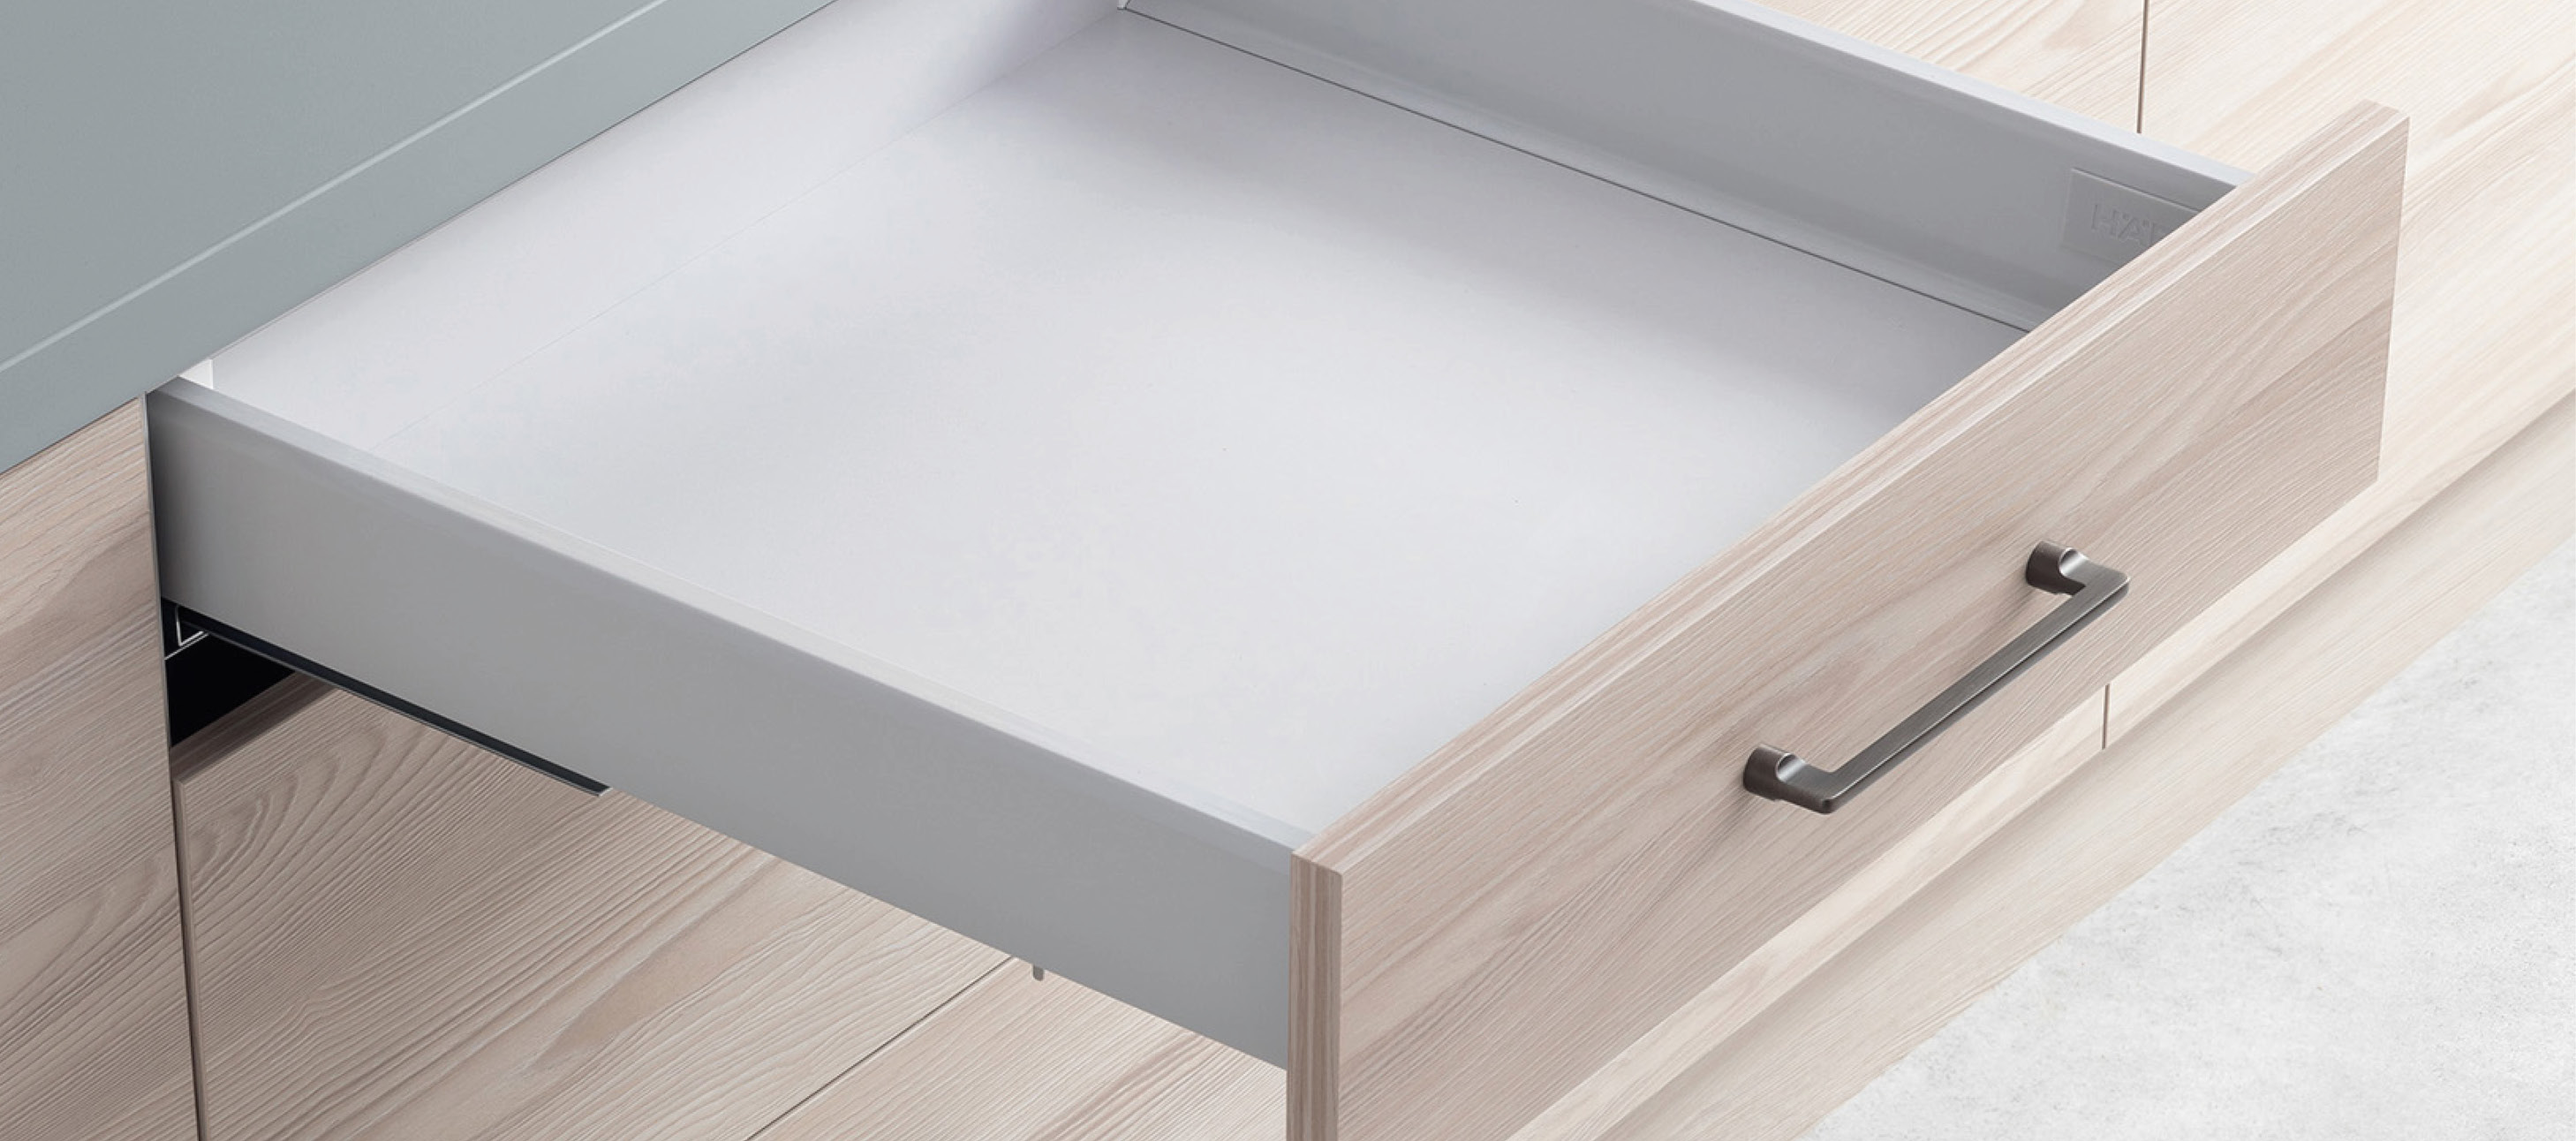 Shop Matrix Box S Drawer Systems from Häfele.